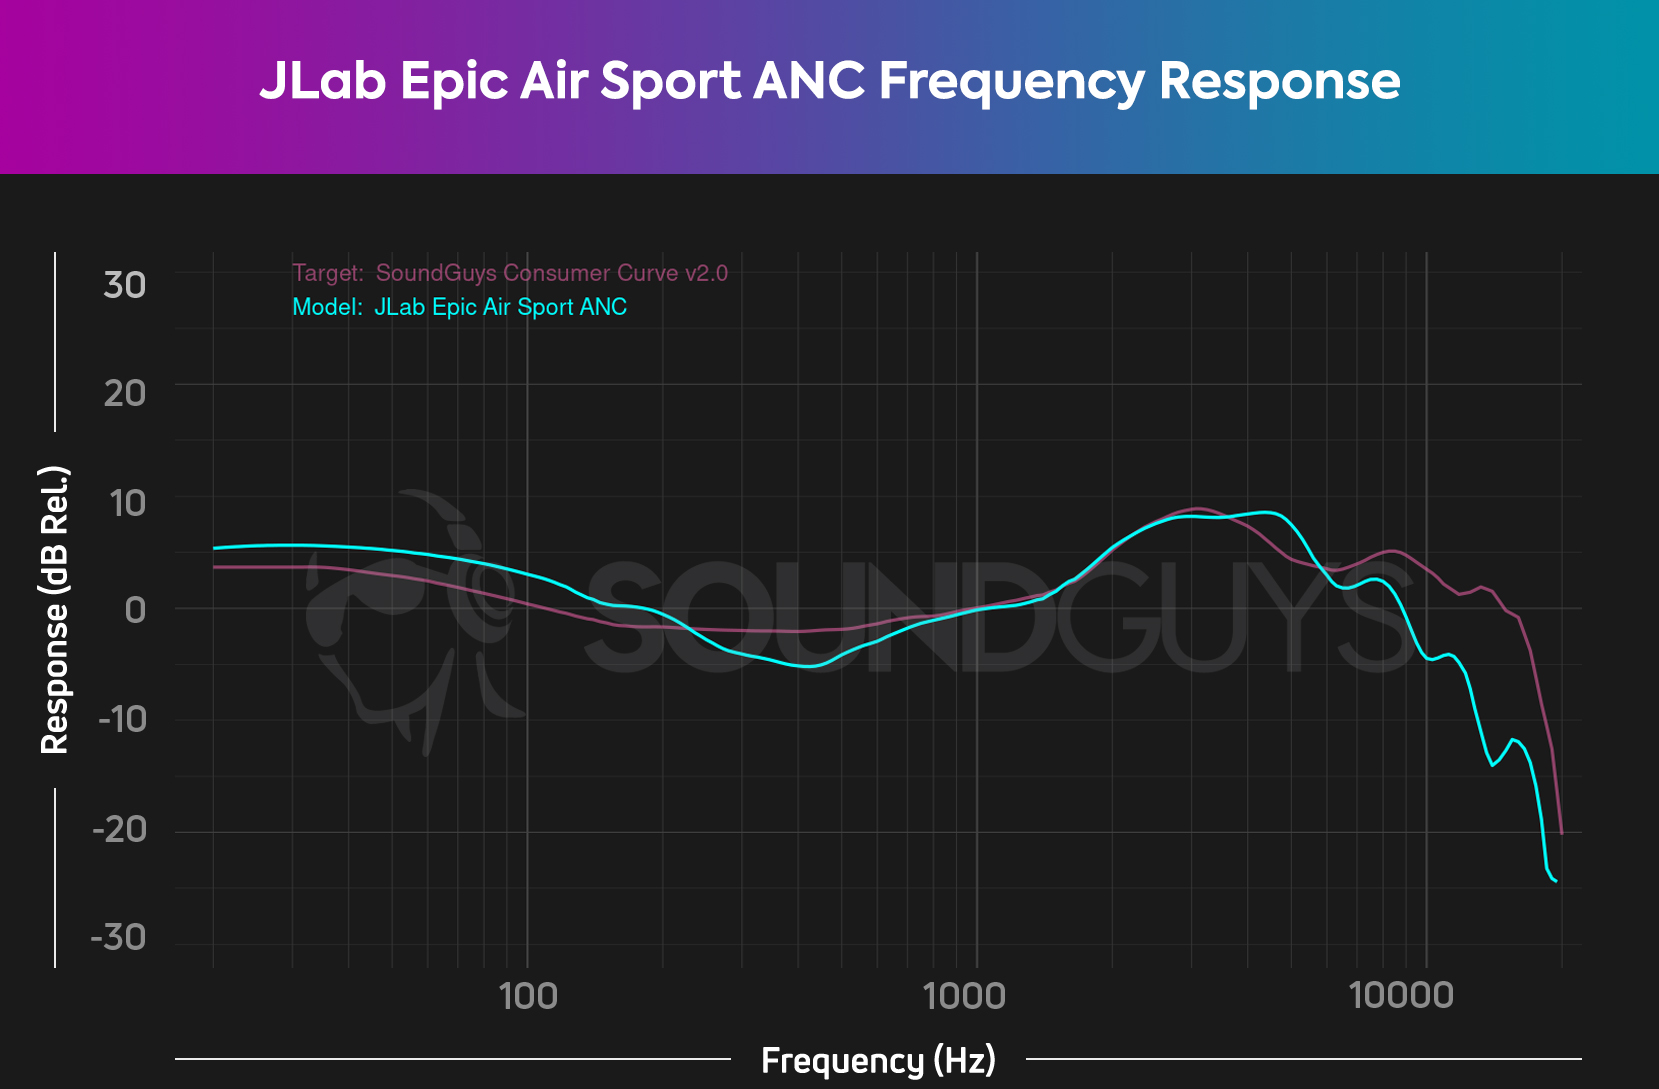 The JLab Epic Air Sport ANC frequency response chart reveals a boosted bass response and under-emphasized midrange/treble response relative to our consumer curve.